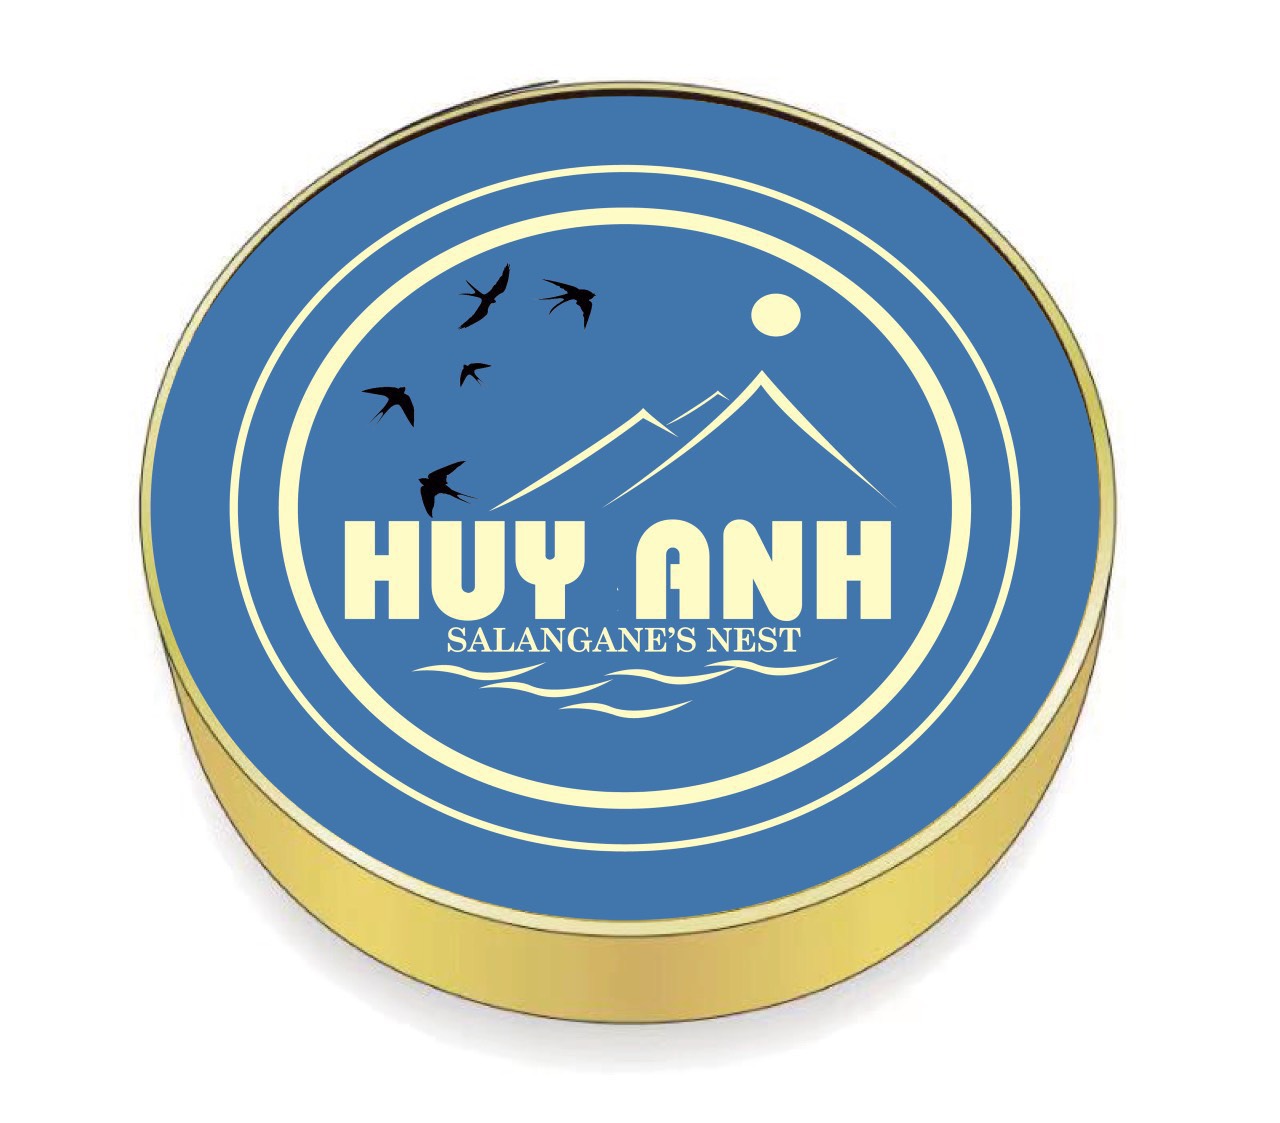 Yen Huy Anh Trading Construction Company Limited